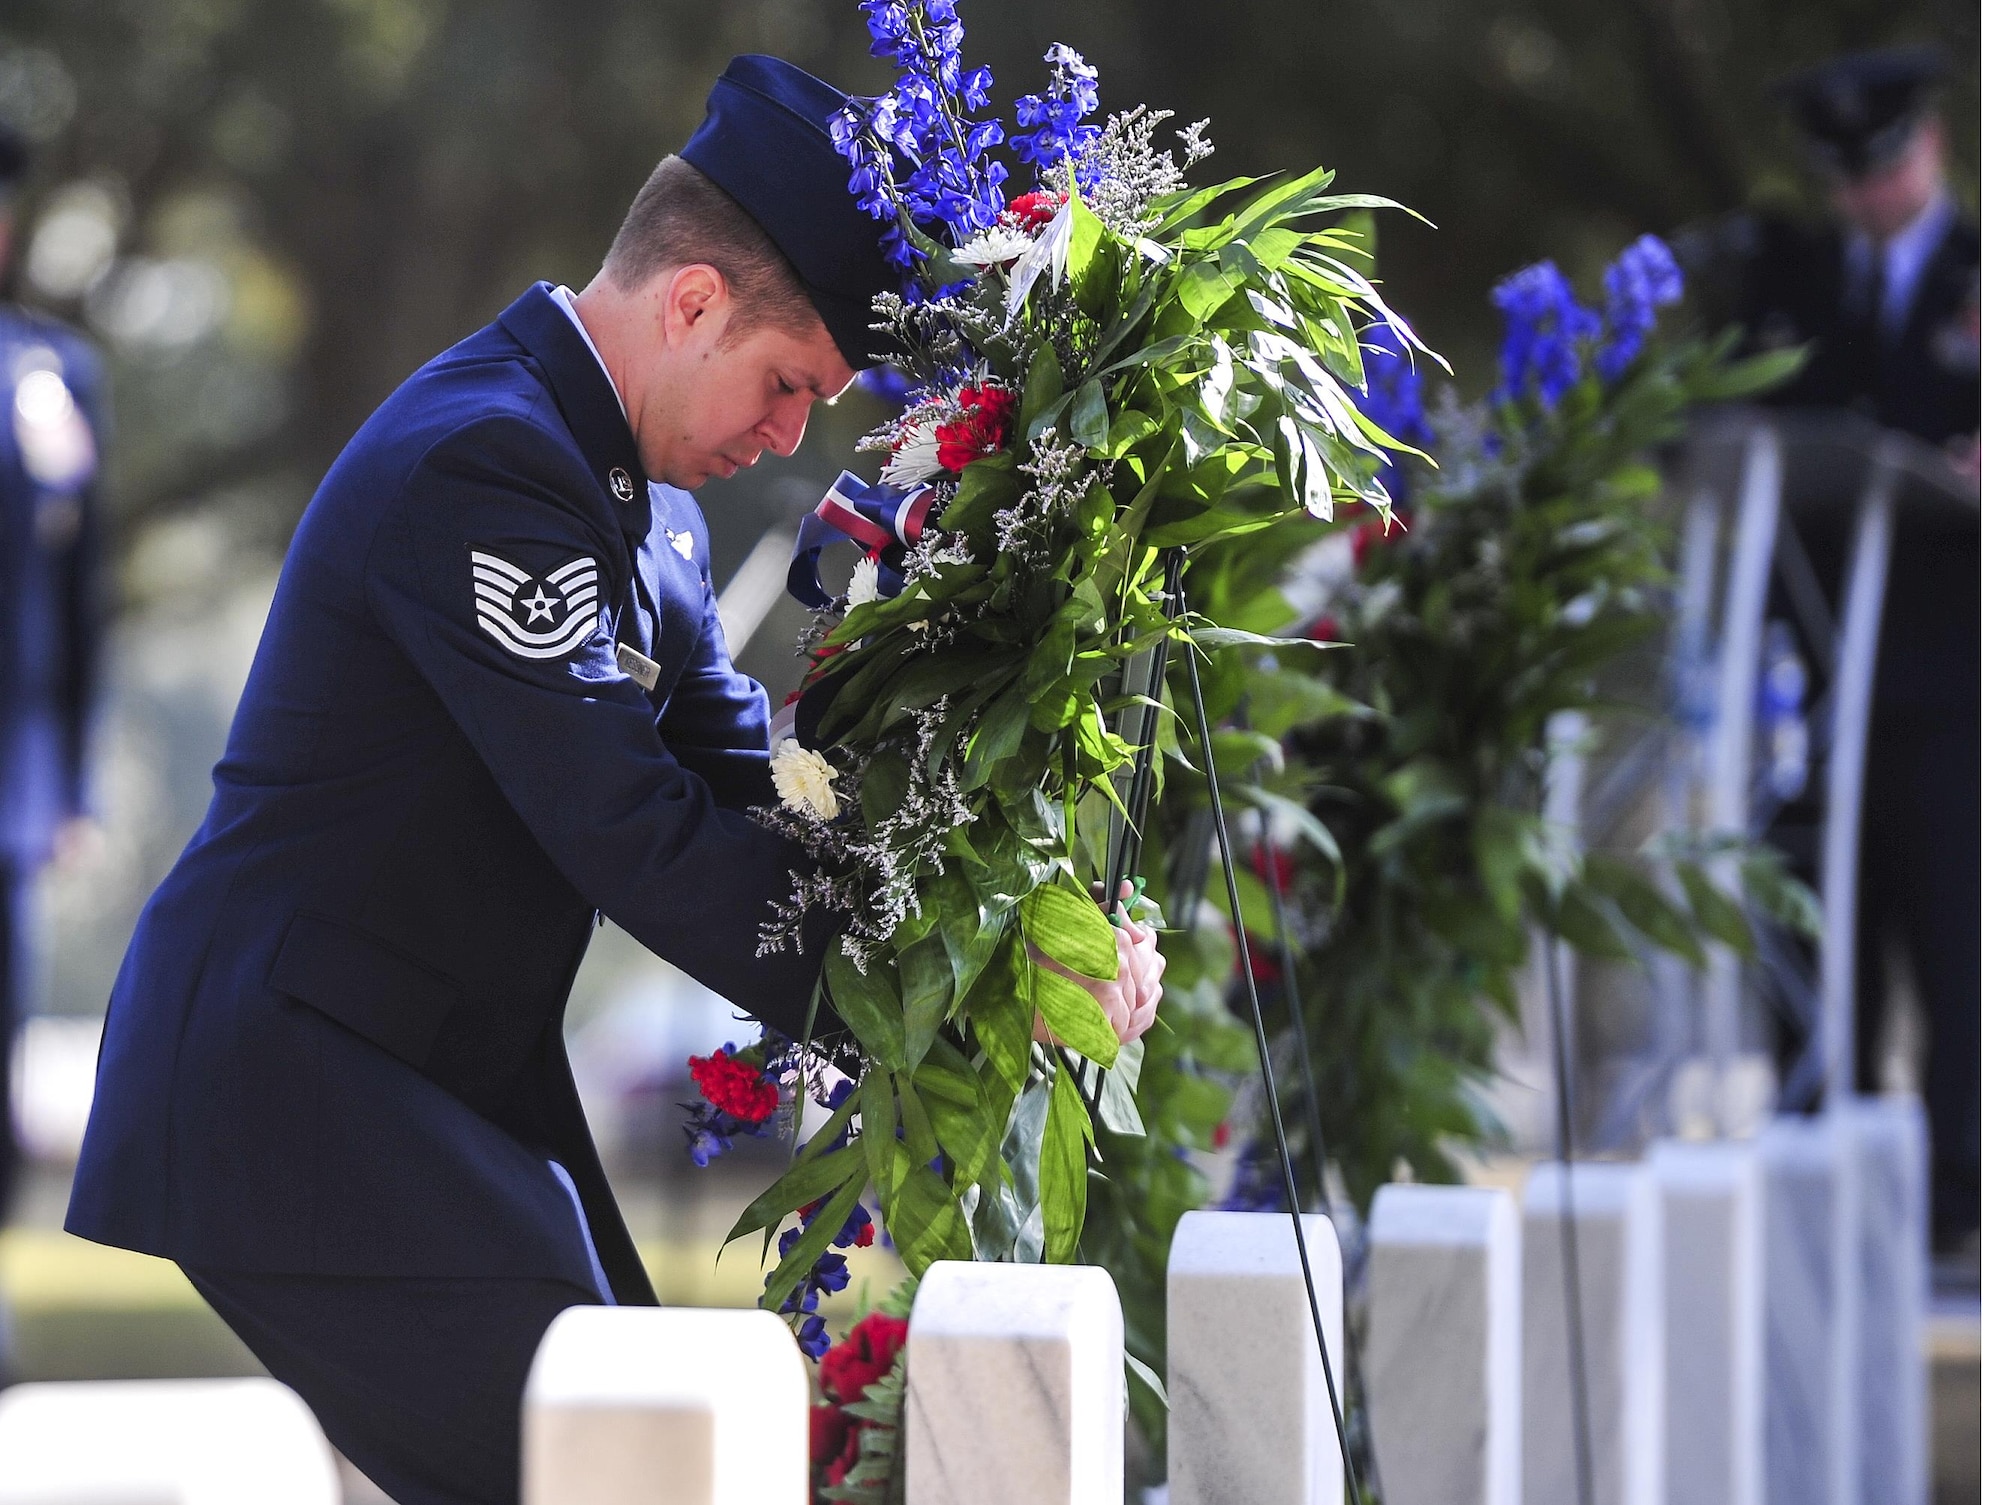 Tech. Sgt. Raymond Kessner, 18th Flight Test Squadron AC-130J sensor operator, lays a wreath during a remembrance ceremony at Barrancas National Cemetery on Naval Air Station Pensacola, Fla., Jan. 31, 2015. The ceremony honored the crew of AC-130H Spectre, Spirit 03, which was shot down Jan. 31, 1991, during the Battle of Khafji. (U.S. Air Force photo/Airman 1st Class Jeff Parkinson)